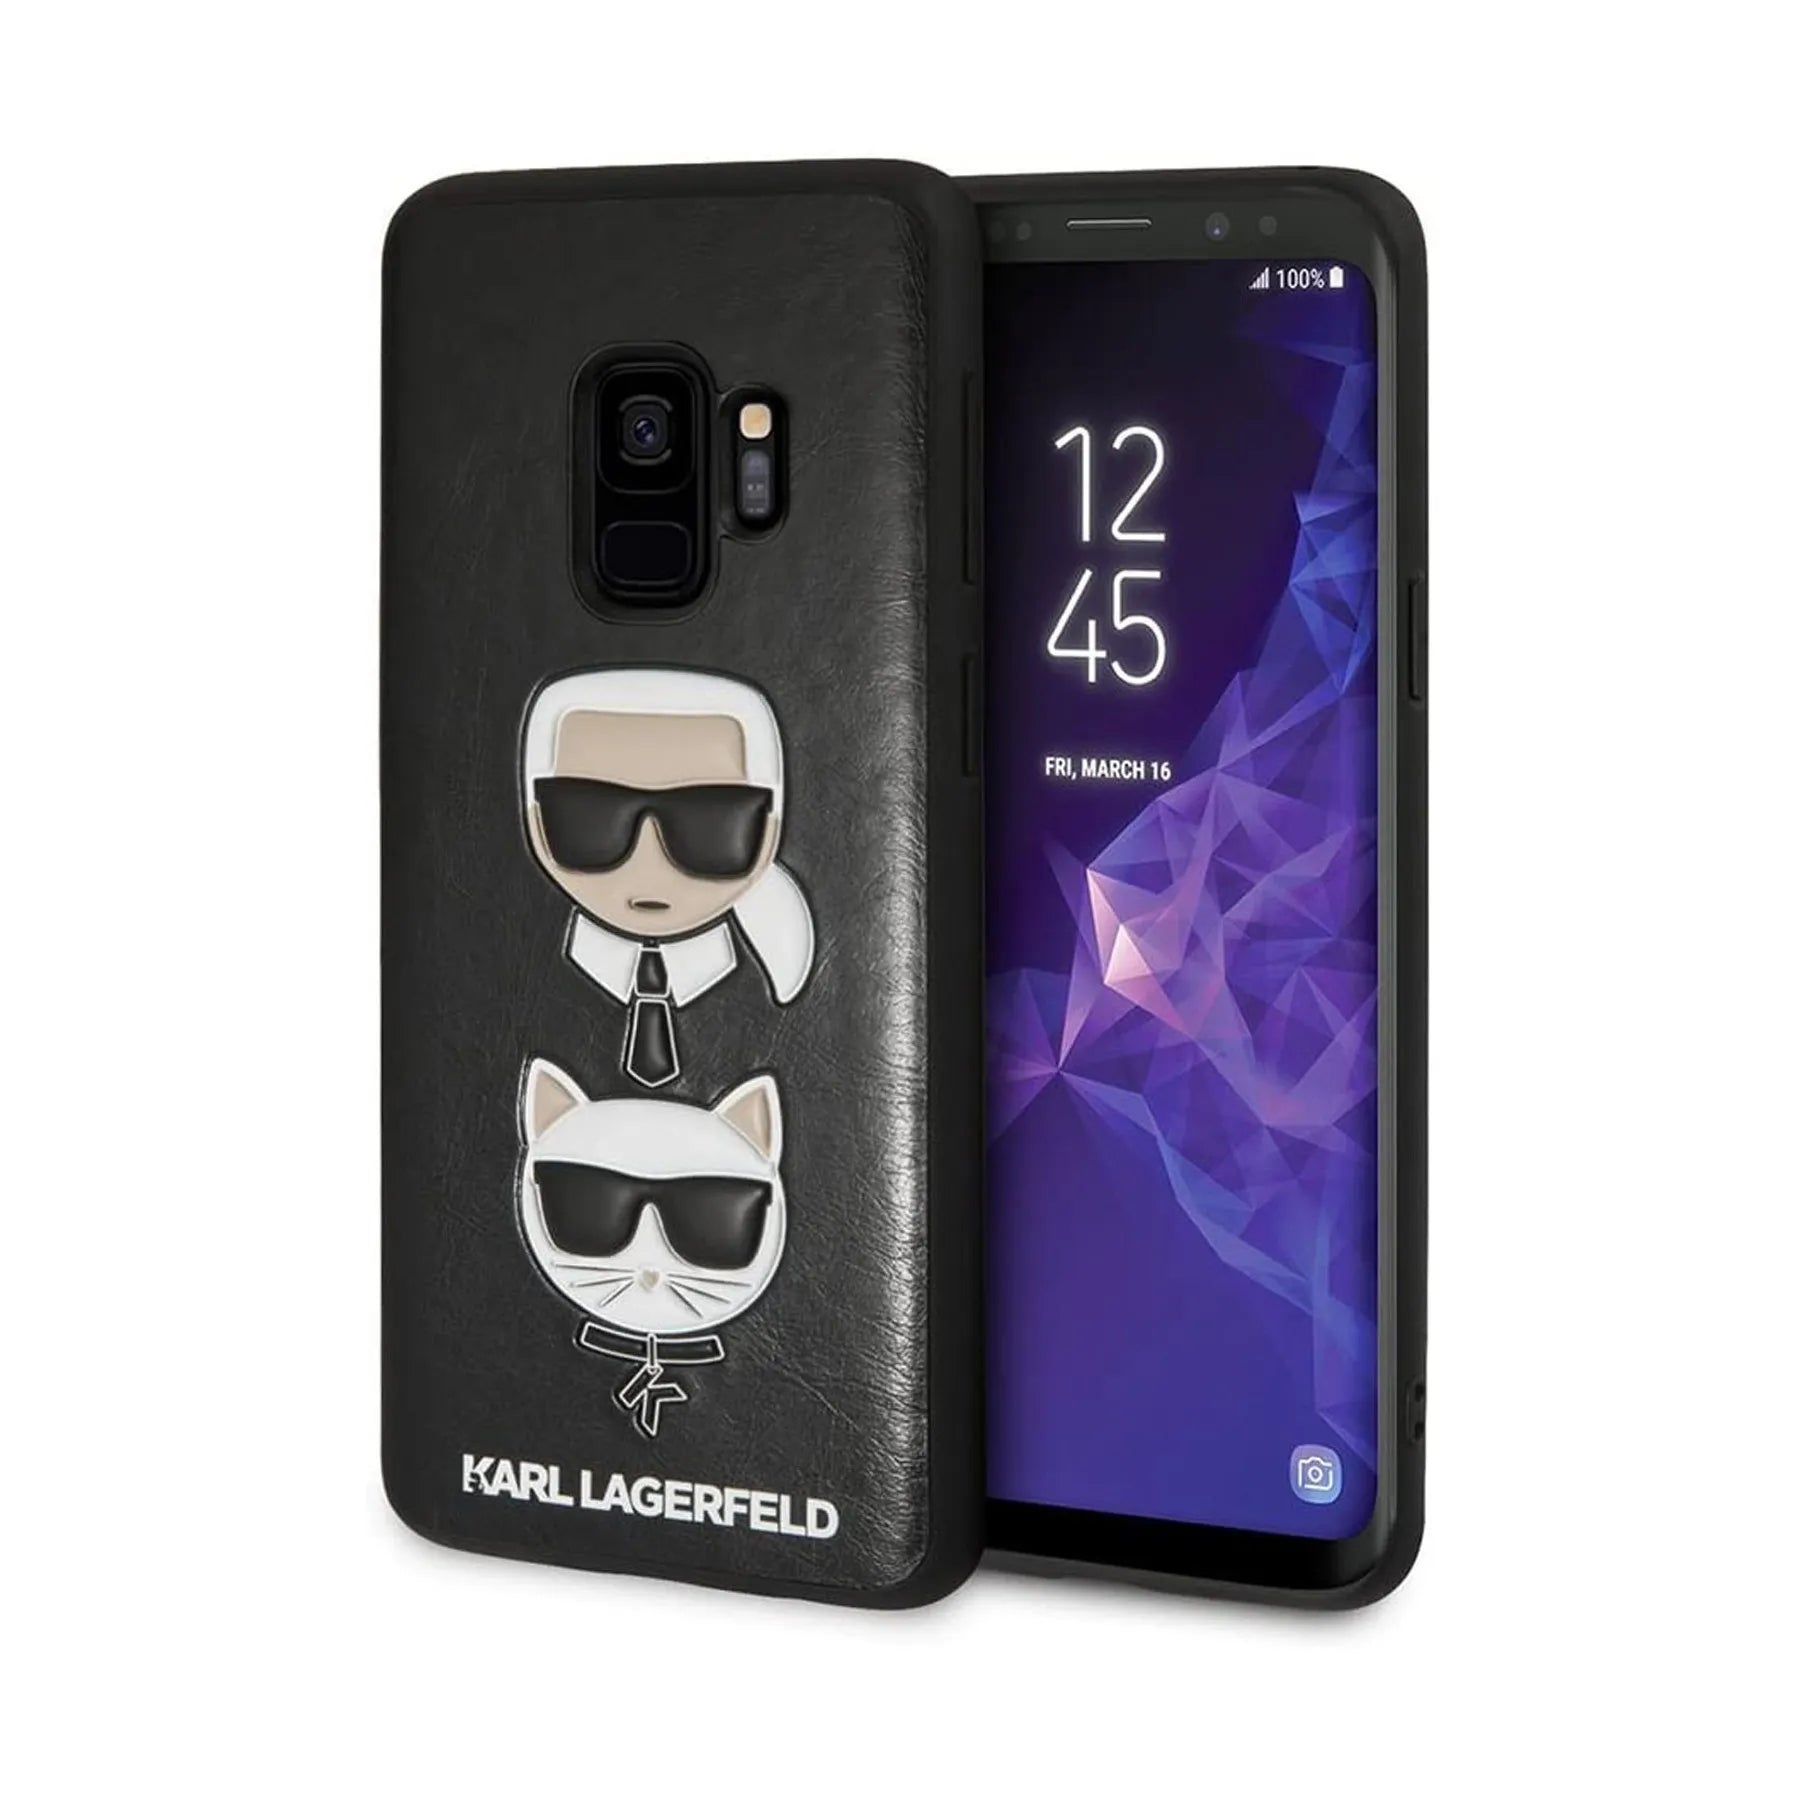 Coque Karl Lagerfeld pour Samsung S9 - My Store